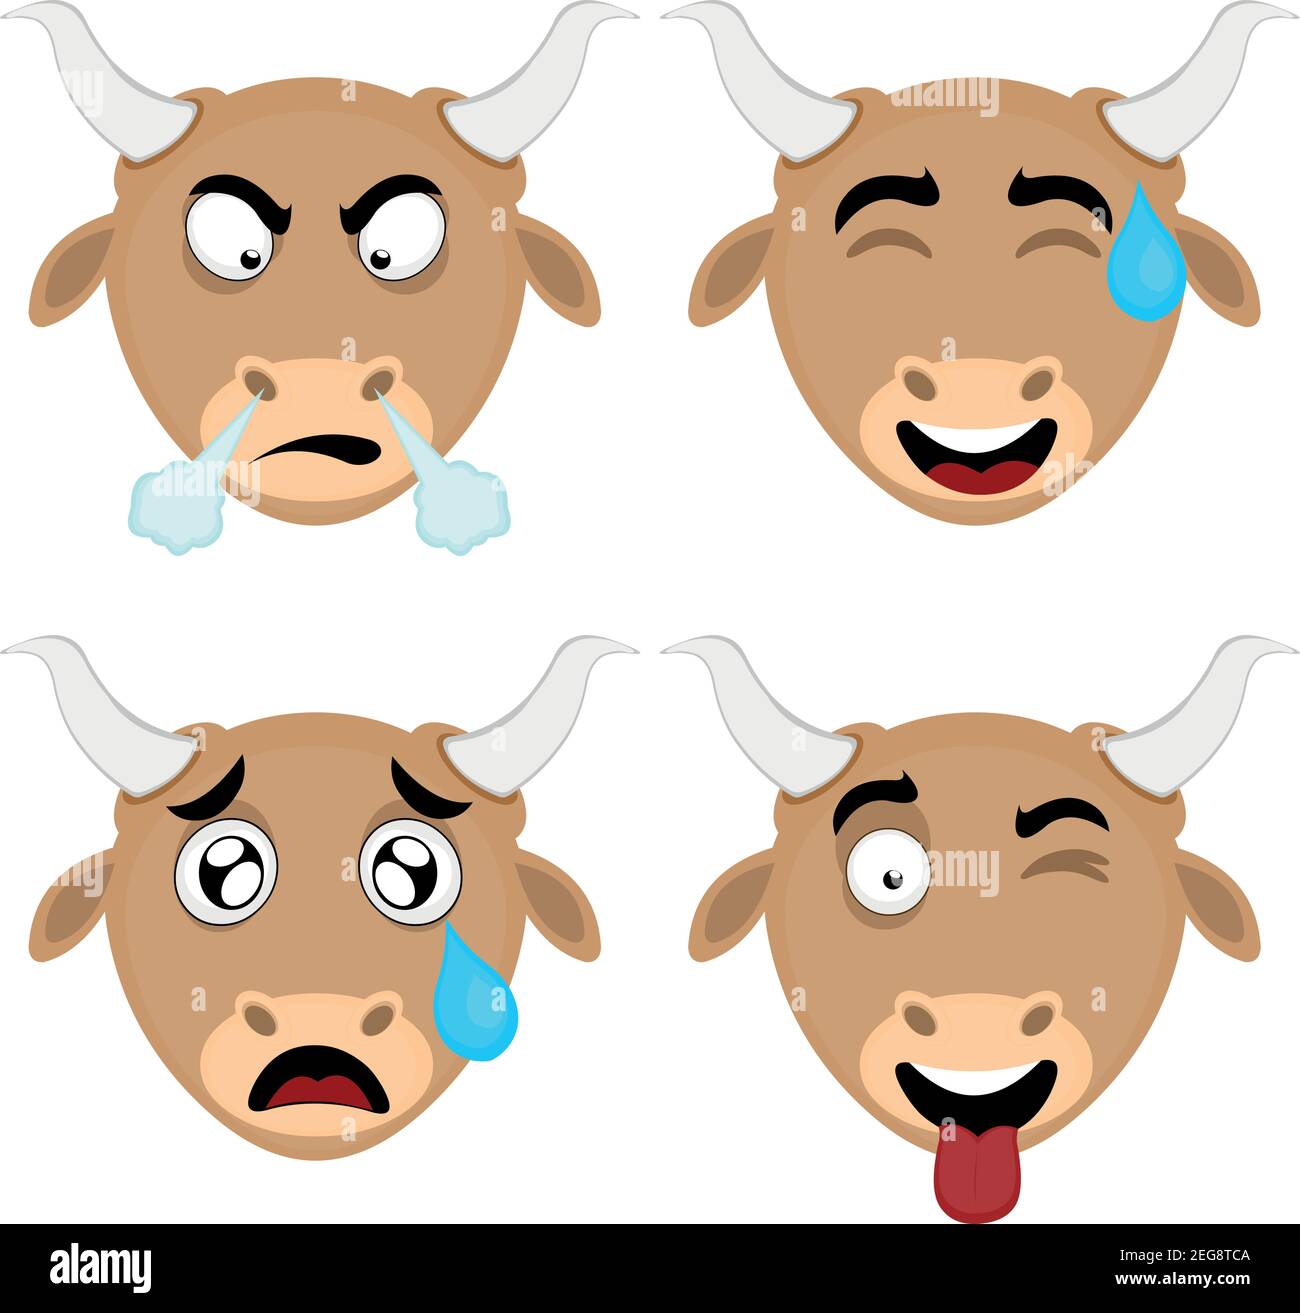 Vector illustration of expressions of a bull cartoon Stock Vector